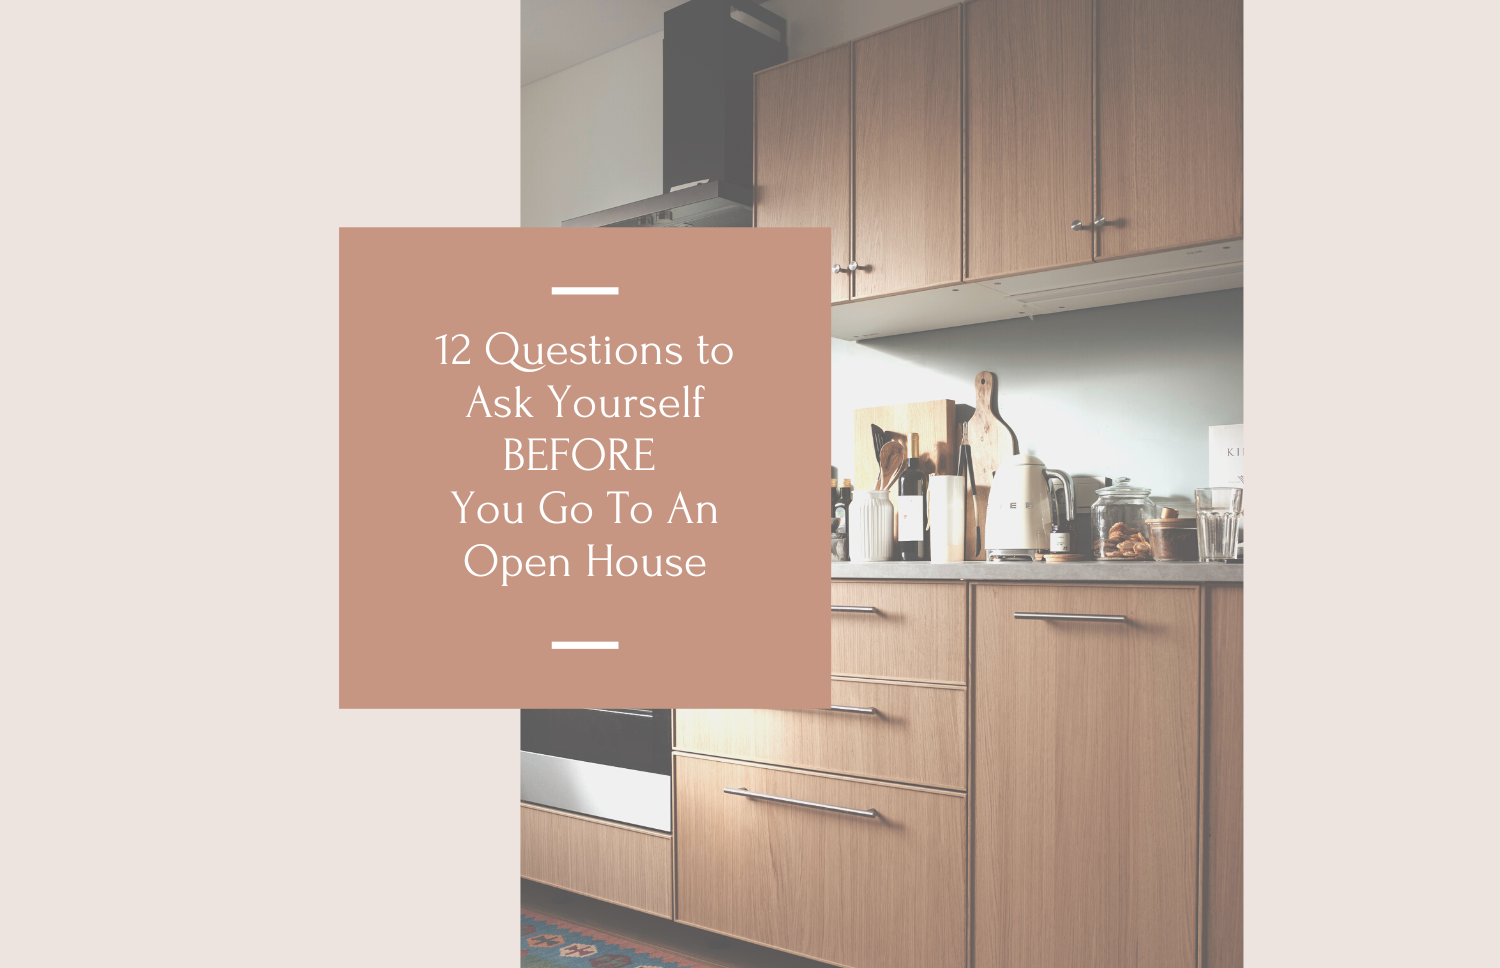 12 Questions To Ask Yourself BEFORE going to an Open House